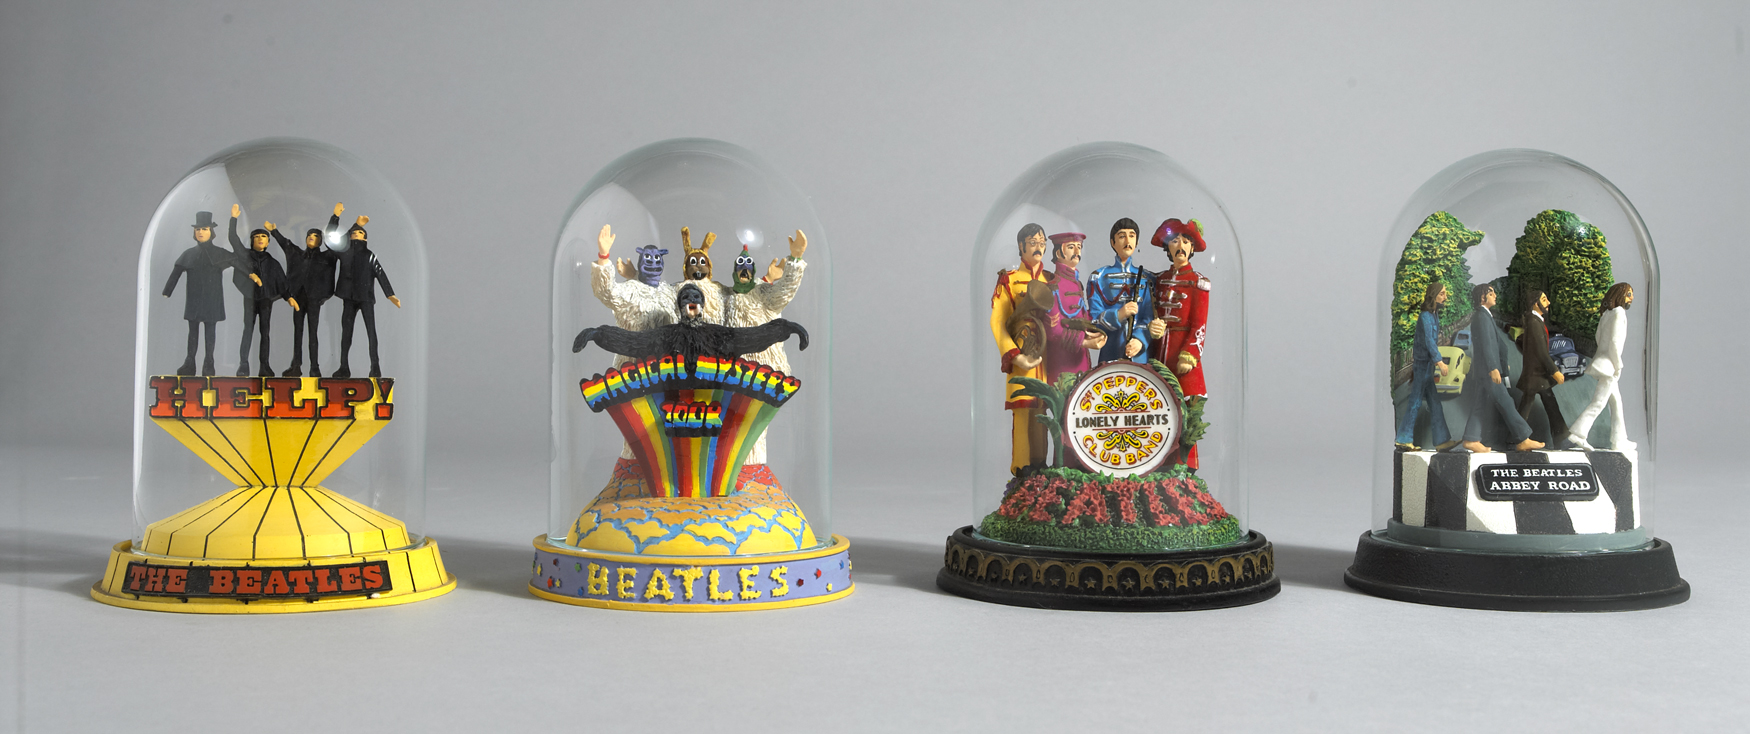 The Beatles: A selection of various souvenirs including limited edition Franklin Mint statues at Whyte's Auctions